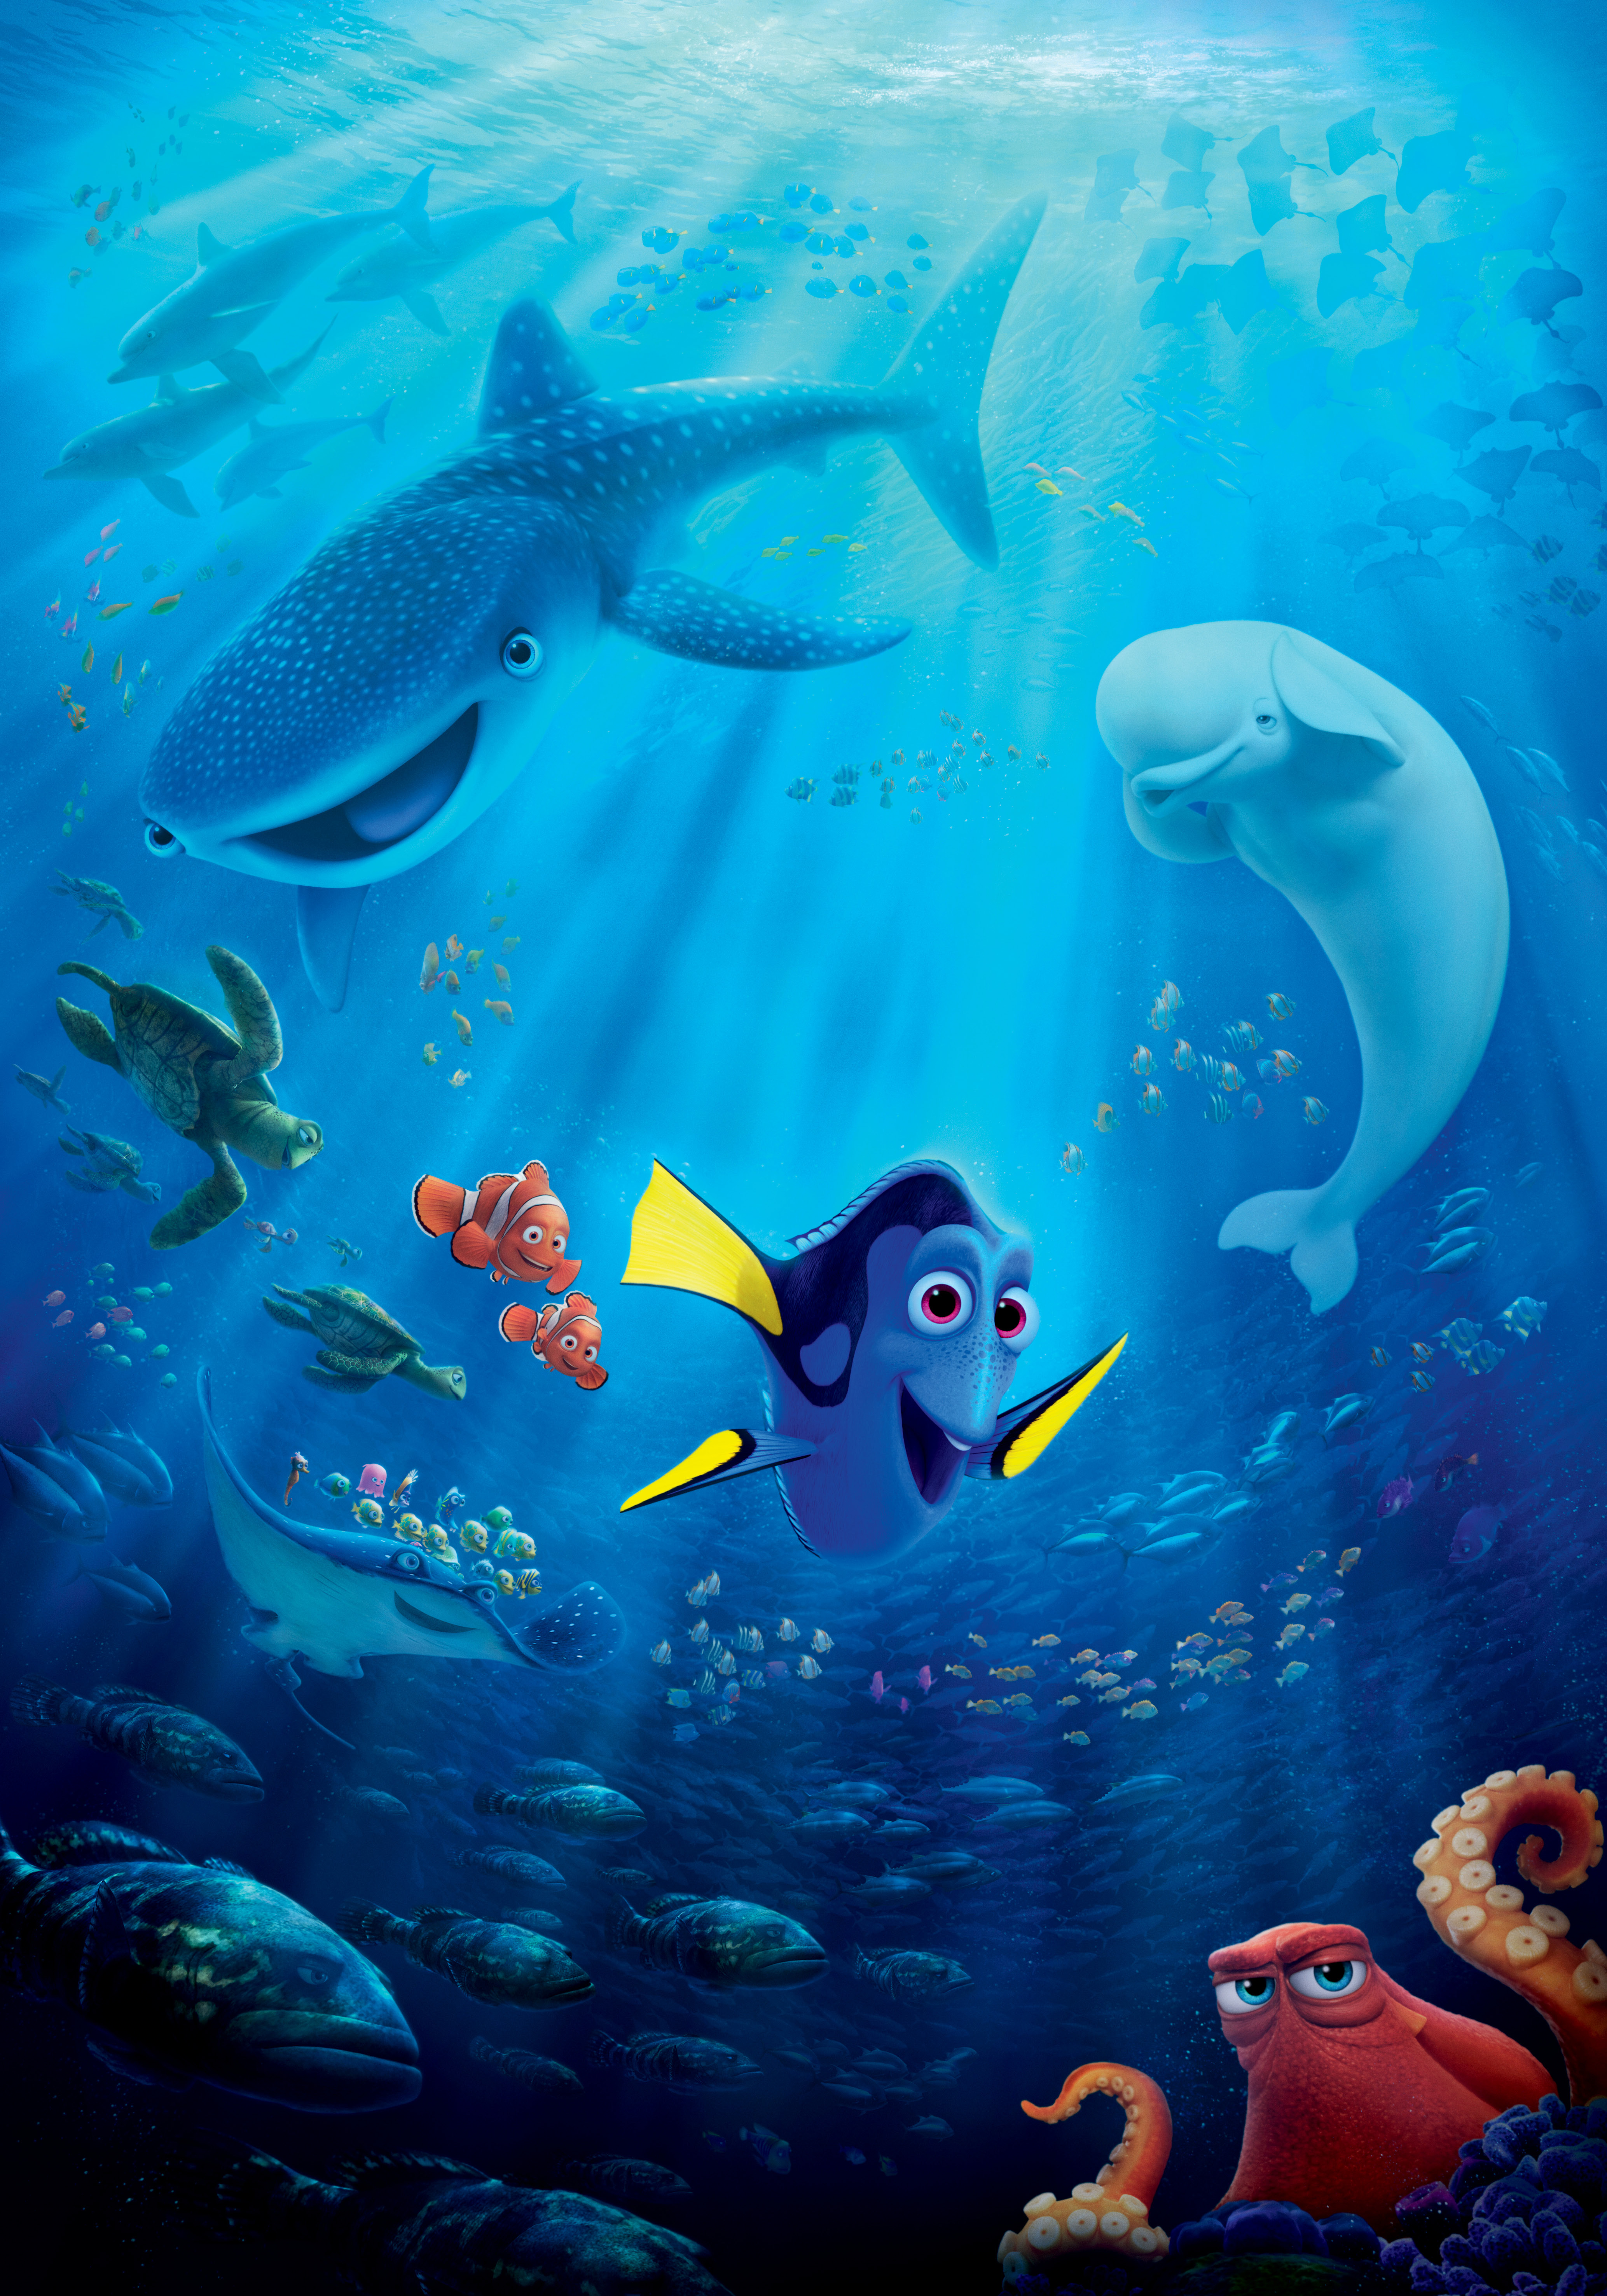 HQ Finding Dory Wallpapers | File 4190.24Kb